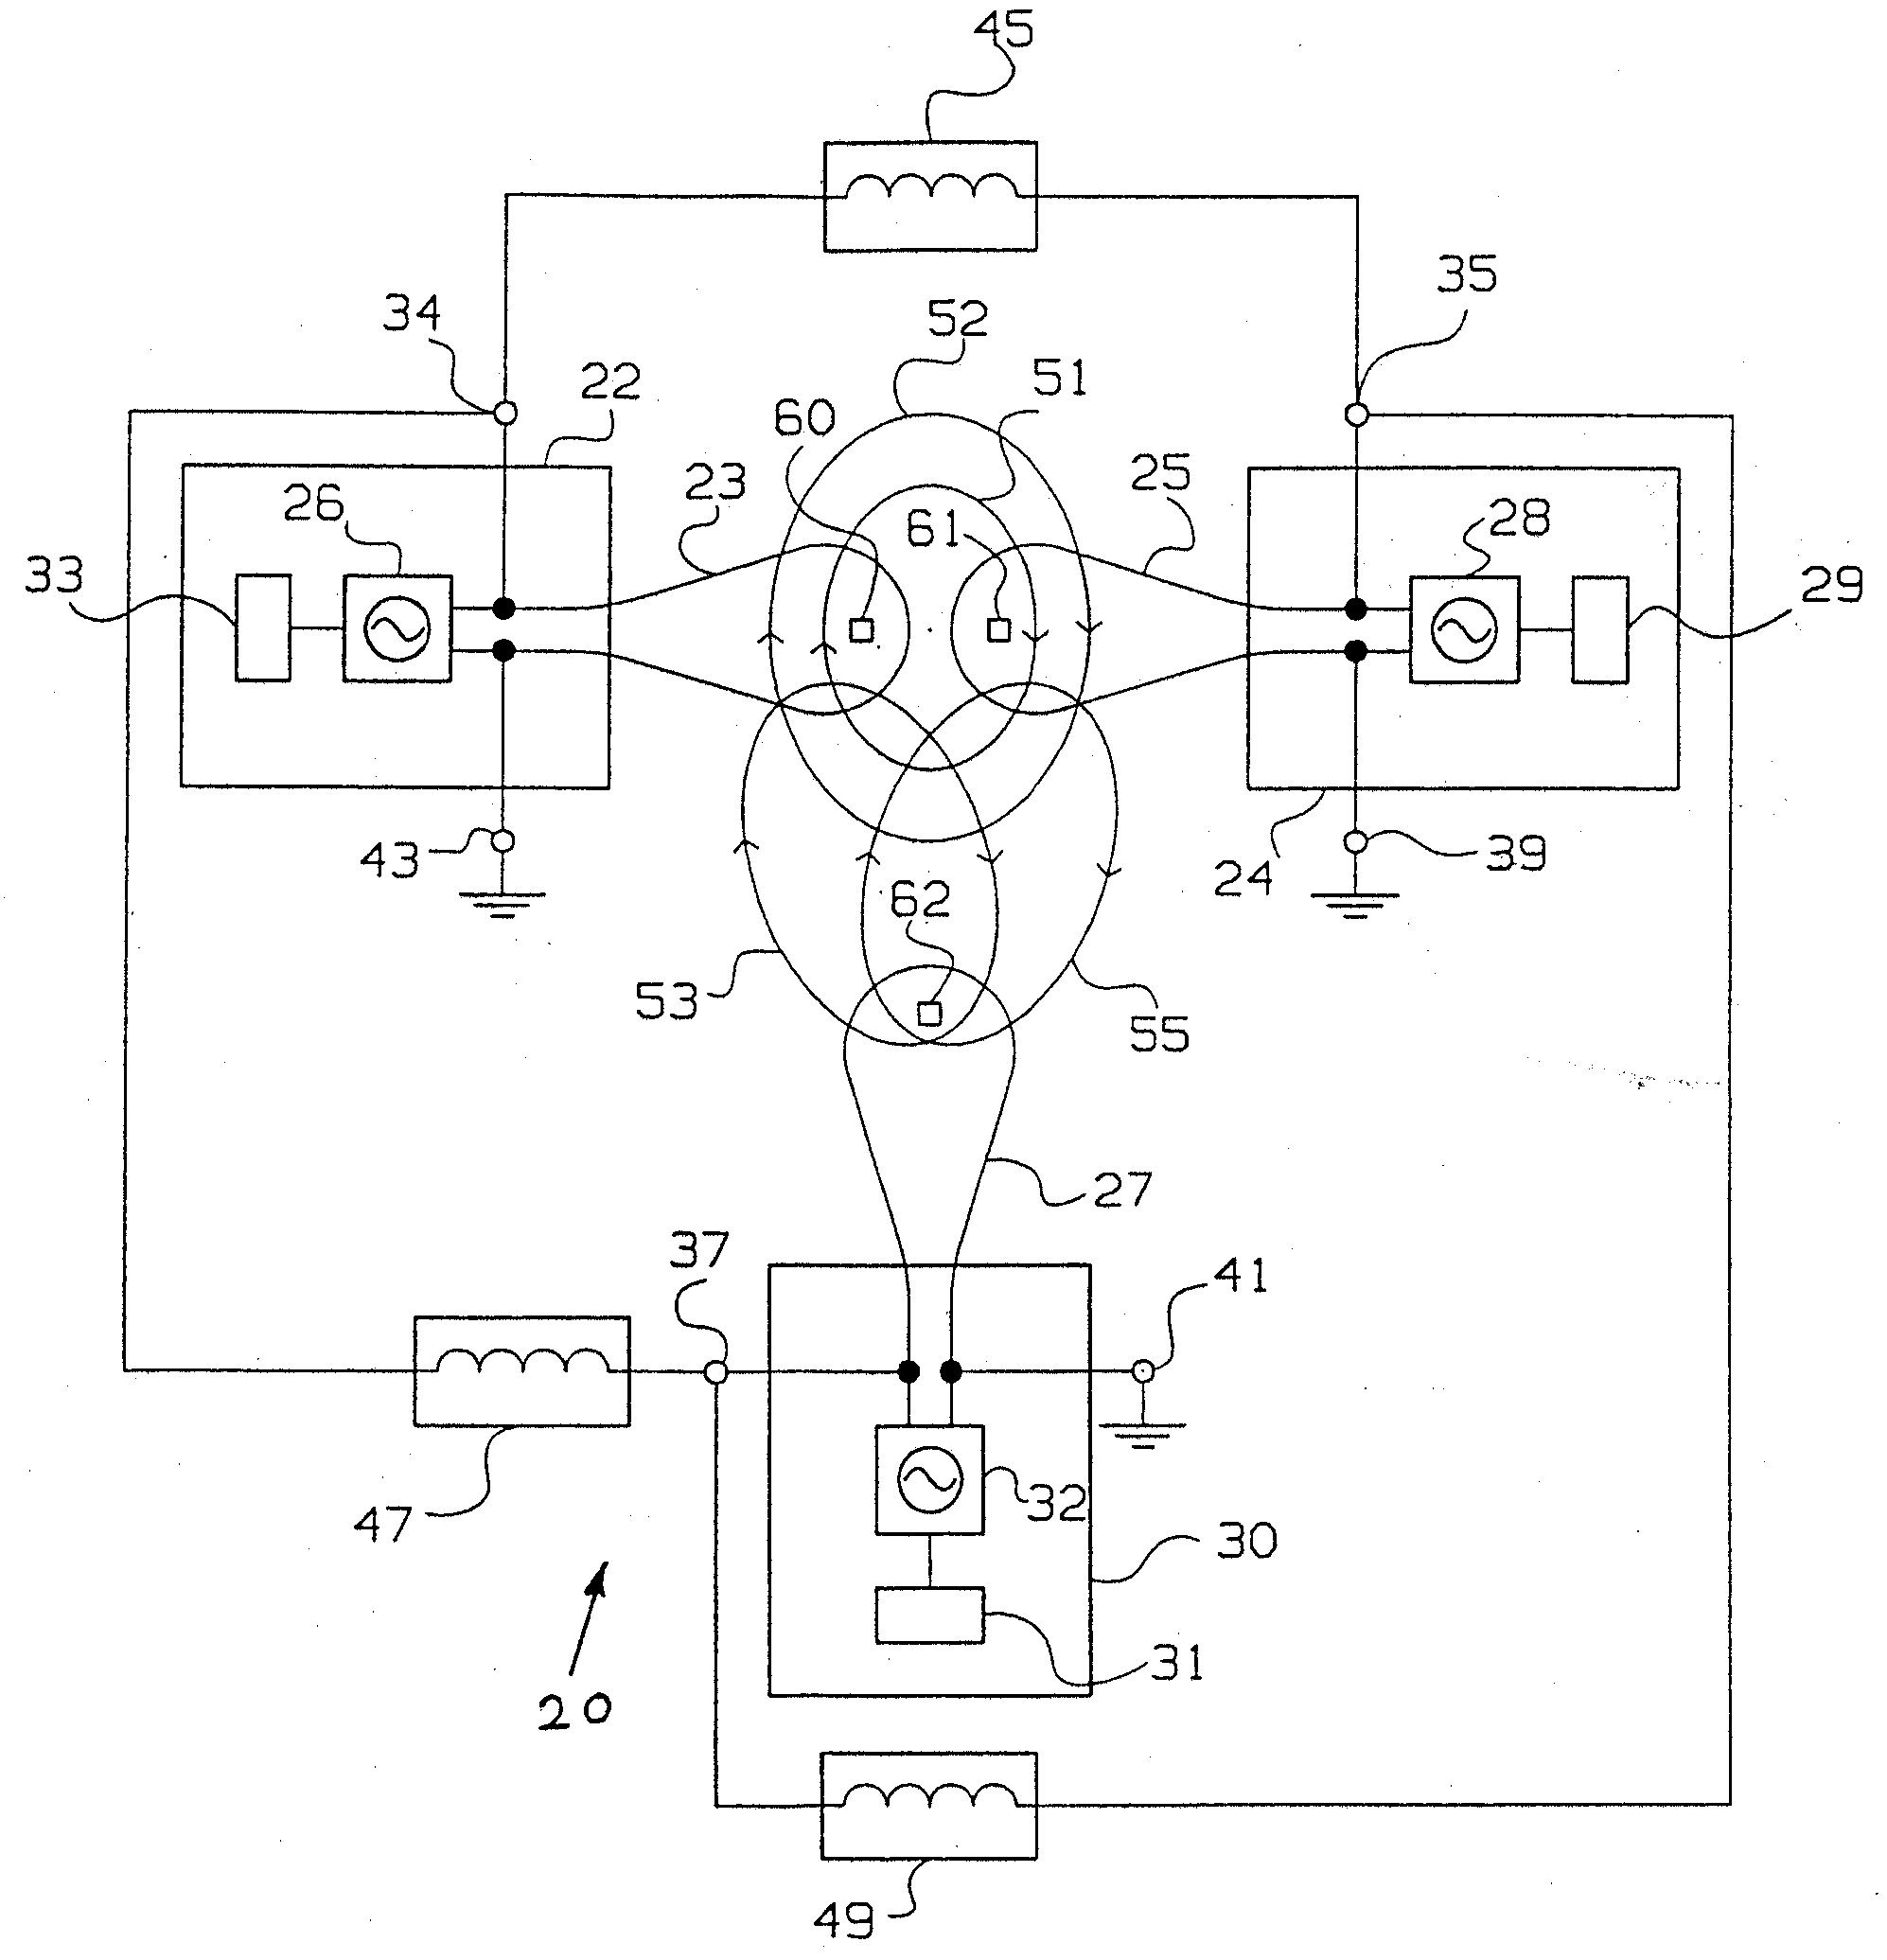 Radio frequency detection system for a medical device and process